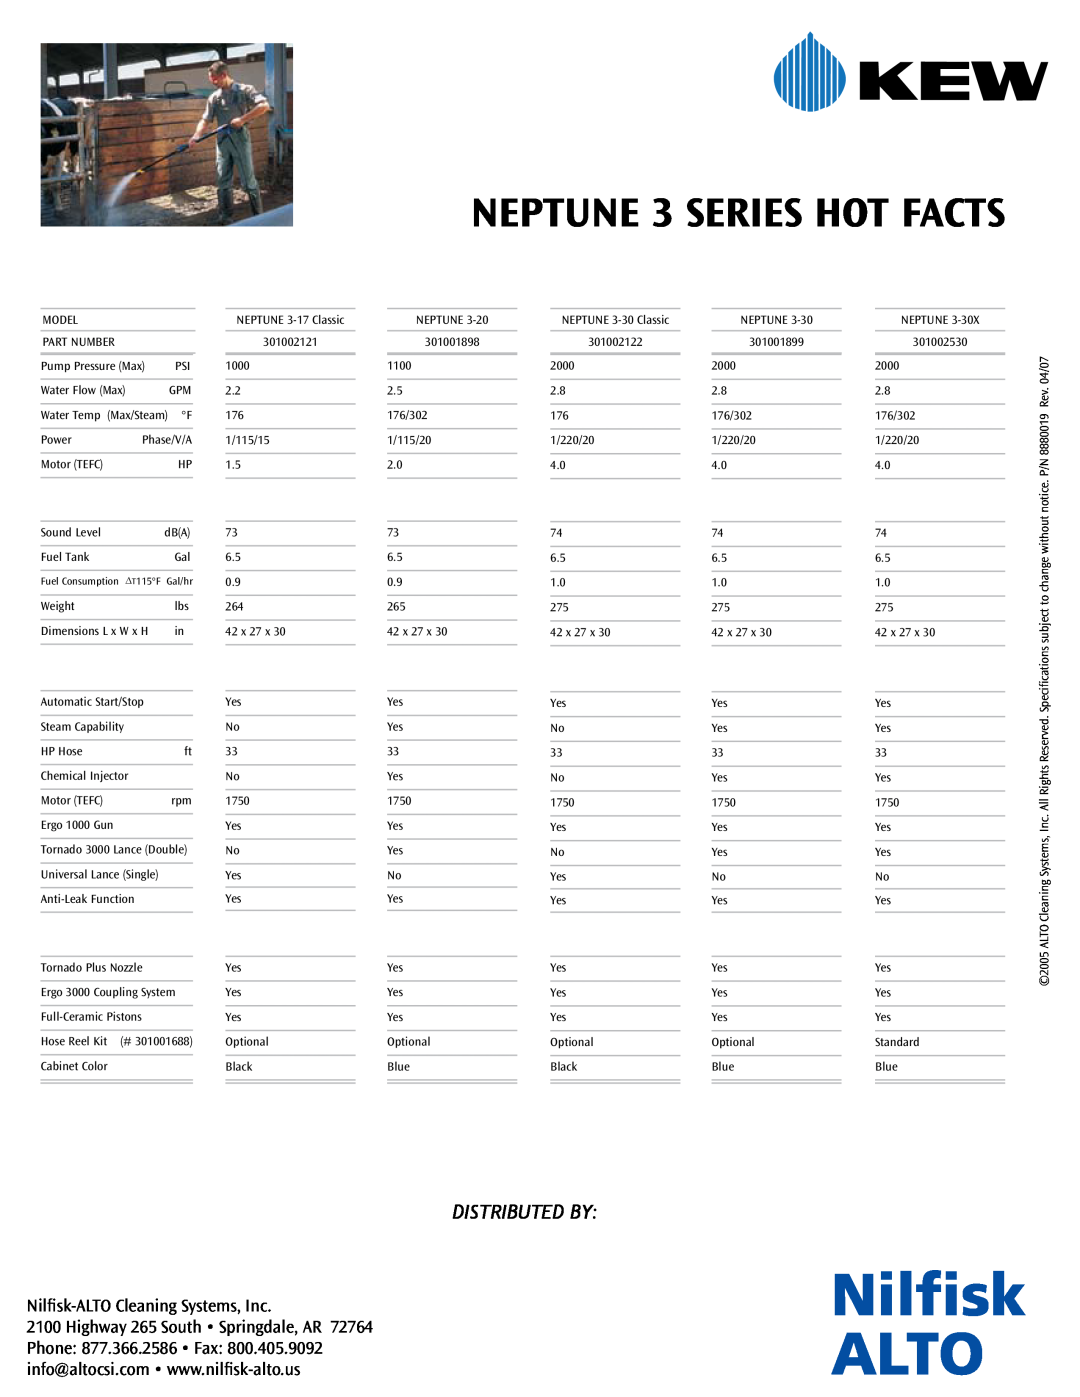 Nilfisk-ALTO 3 Series manual Nilfisk-ALTOCleaning Systems, Inc, NEPTUNE 3 SERIES HOT FACTS, Distributed By 